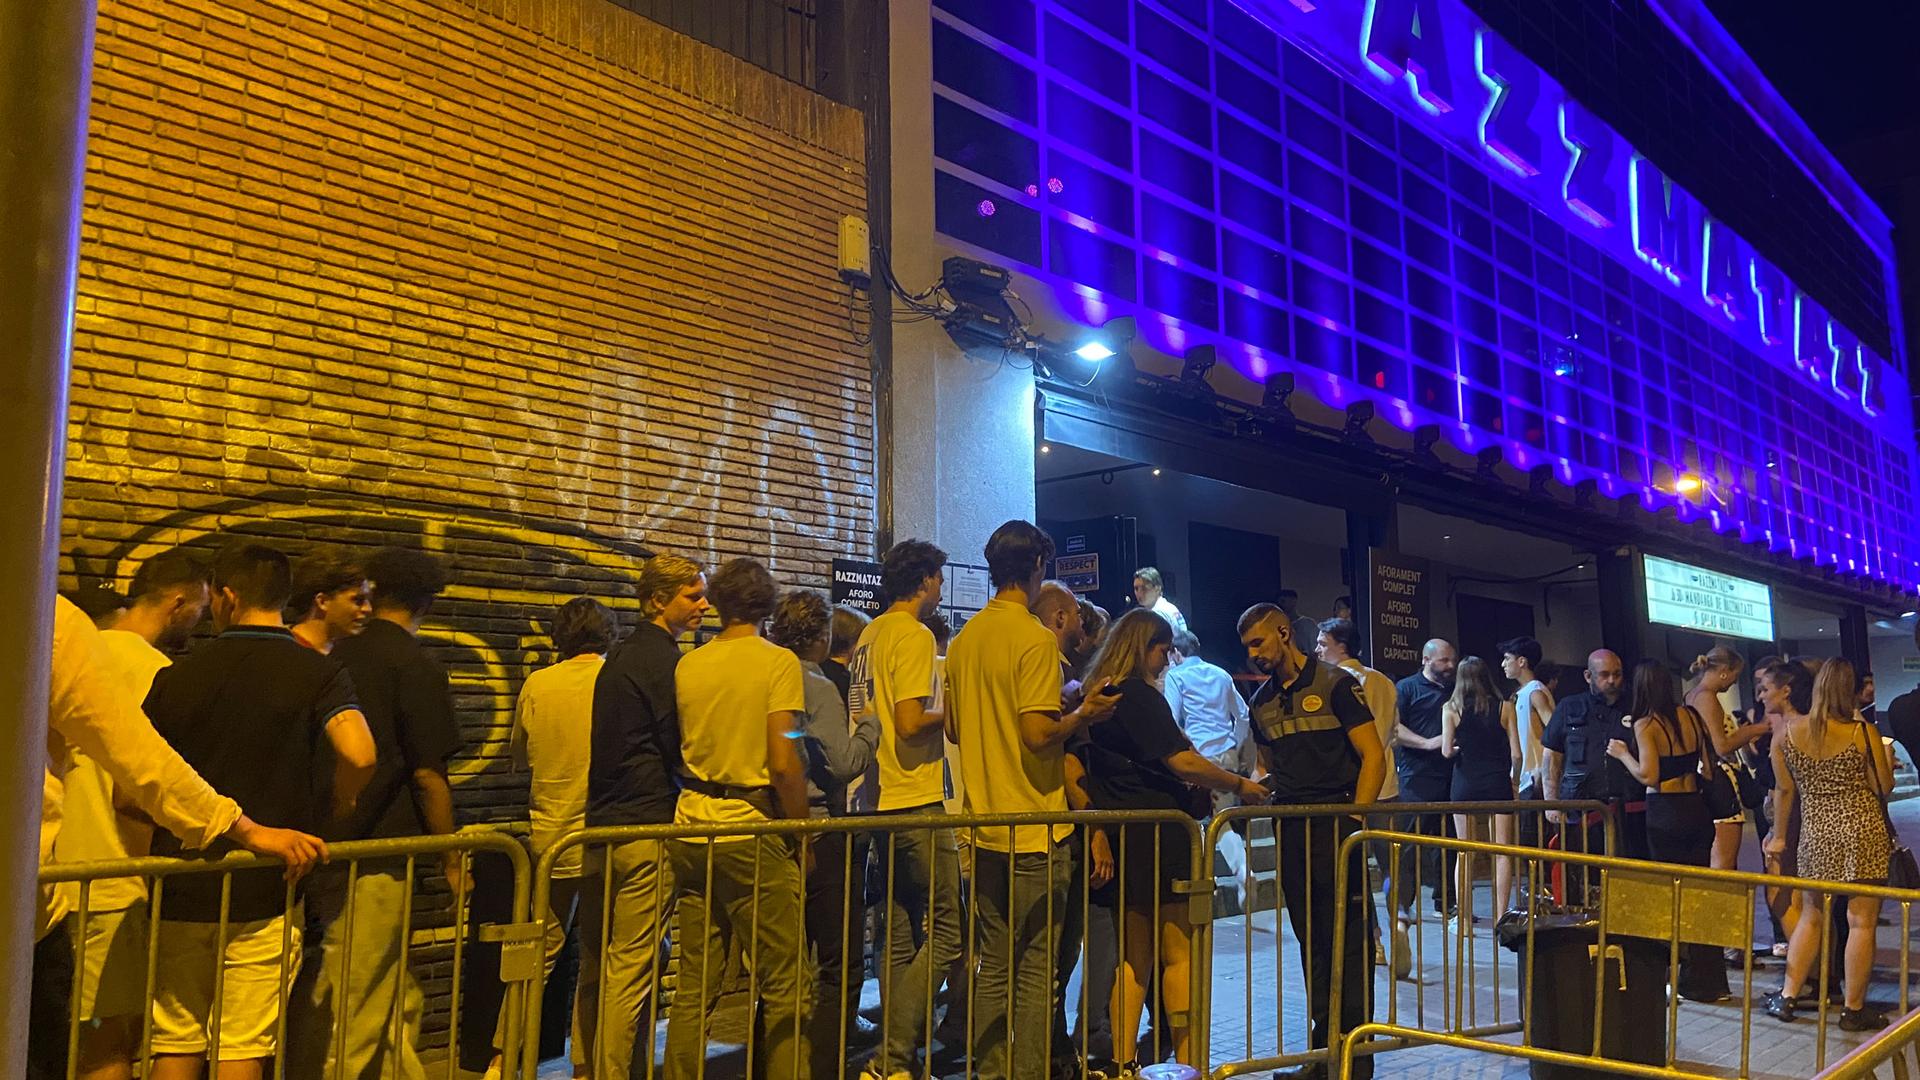 Hundreds of young people line up outside the Razzmatazz disco in Barcelona. Security guards are constantly on the look out for men trying to take advantage of inebriated women.